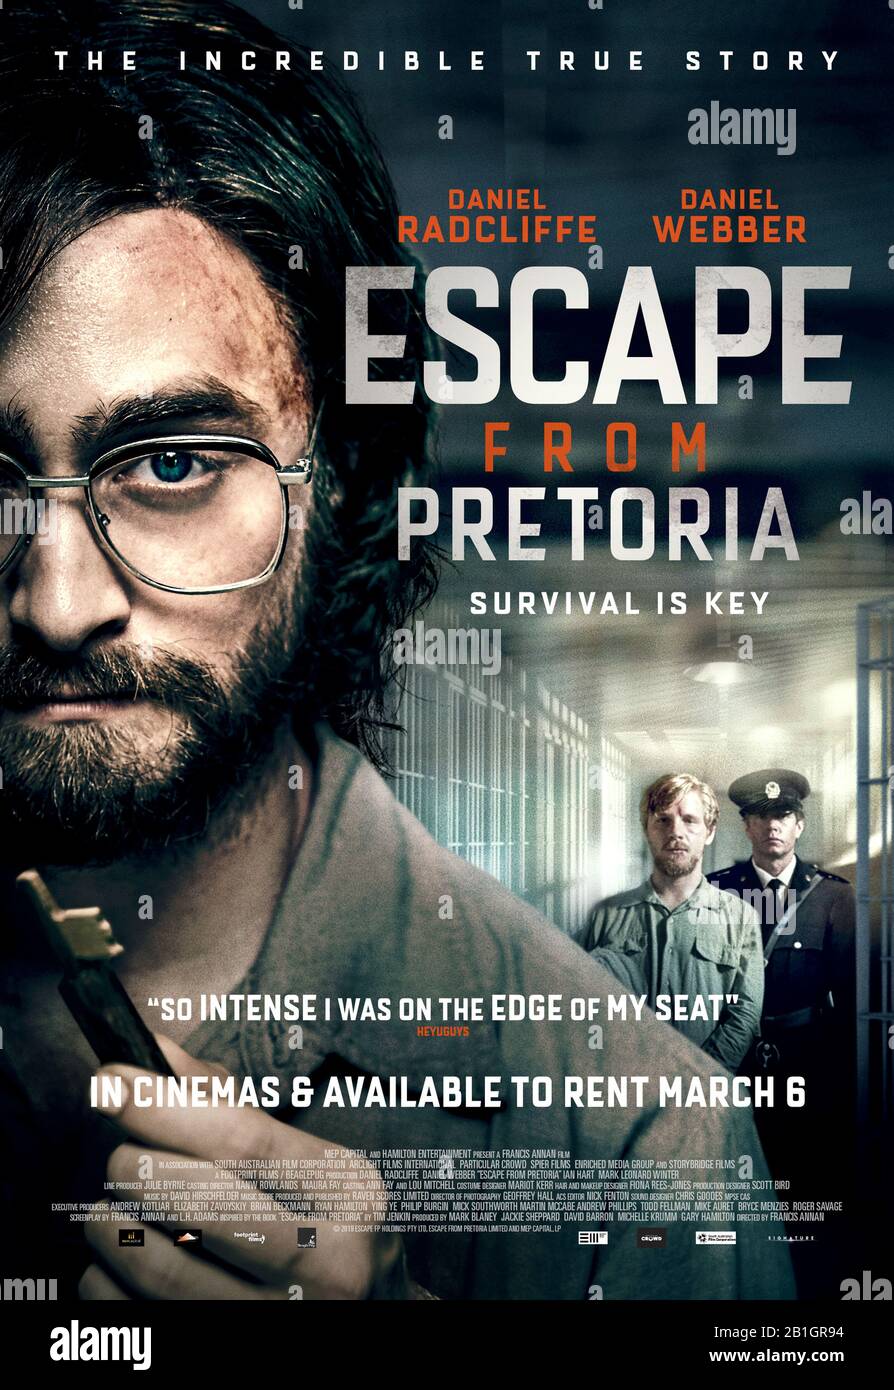 Escape from Pretoria (2020) directed by Francis Annan and starring Daniel Radcliffe, Ian Hart, Daniel Webber and Nathan Page. Based on the true story about 3 political prisoners who escape prison in South Africa in 1979. Stock Photo